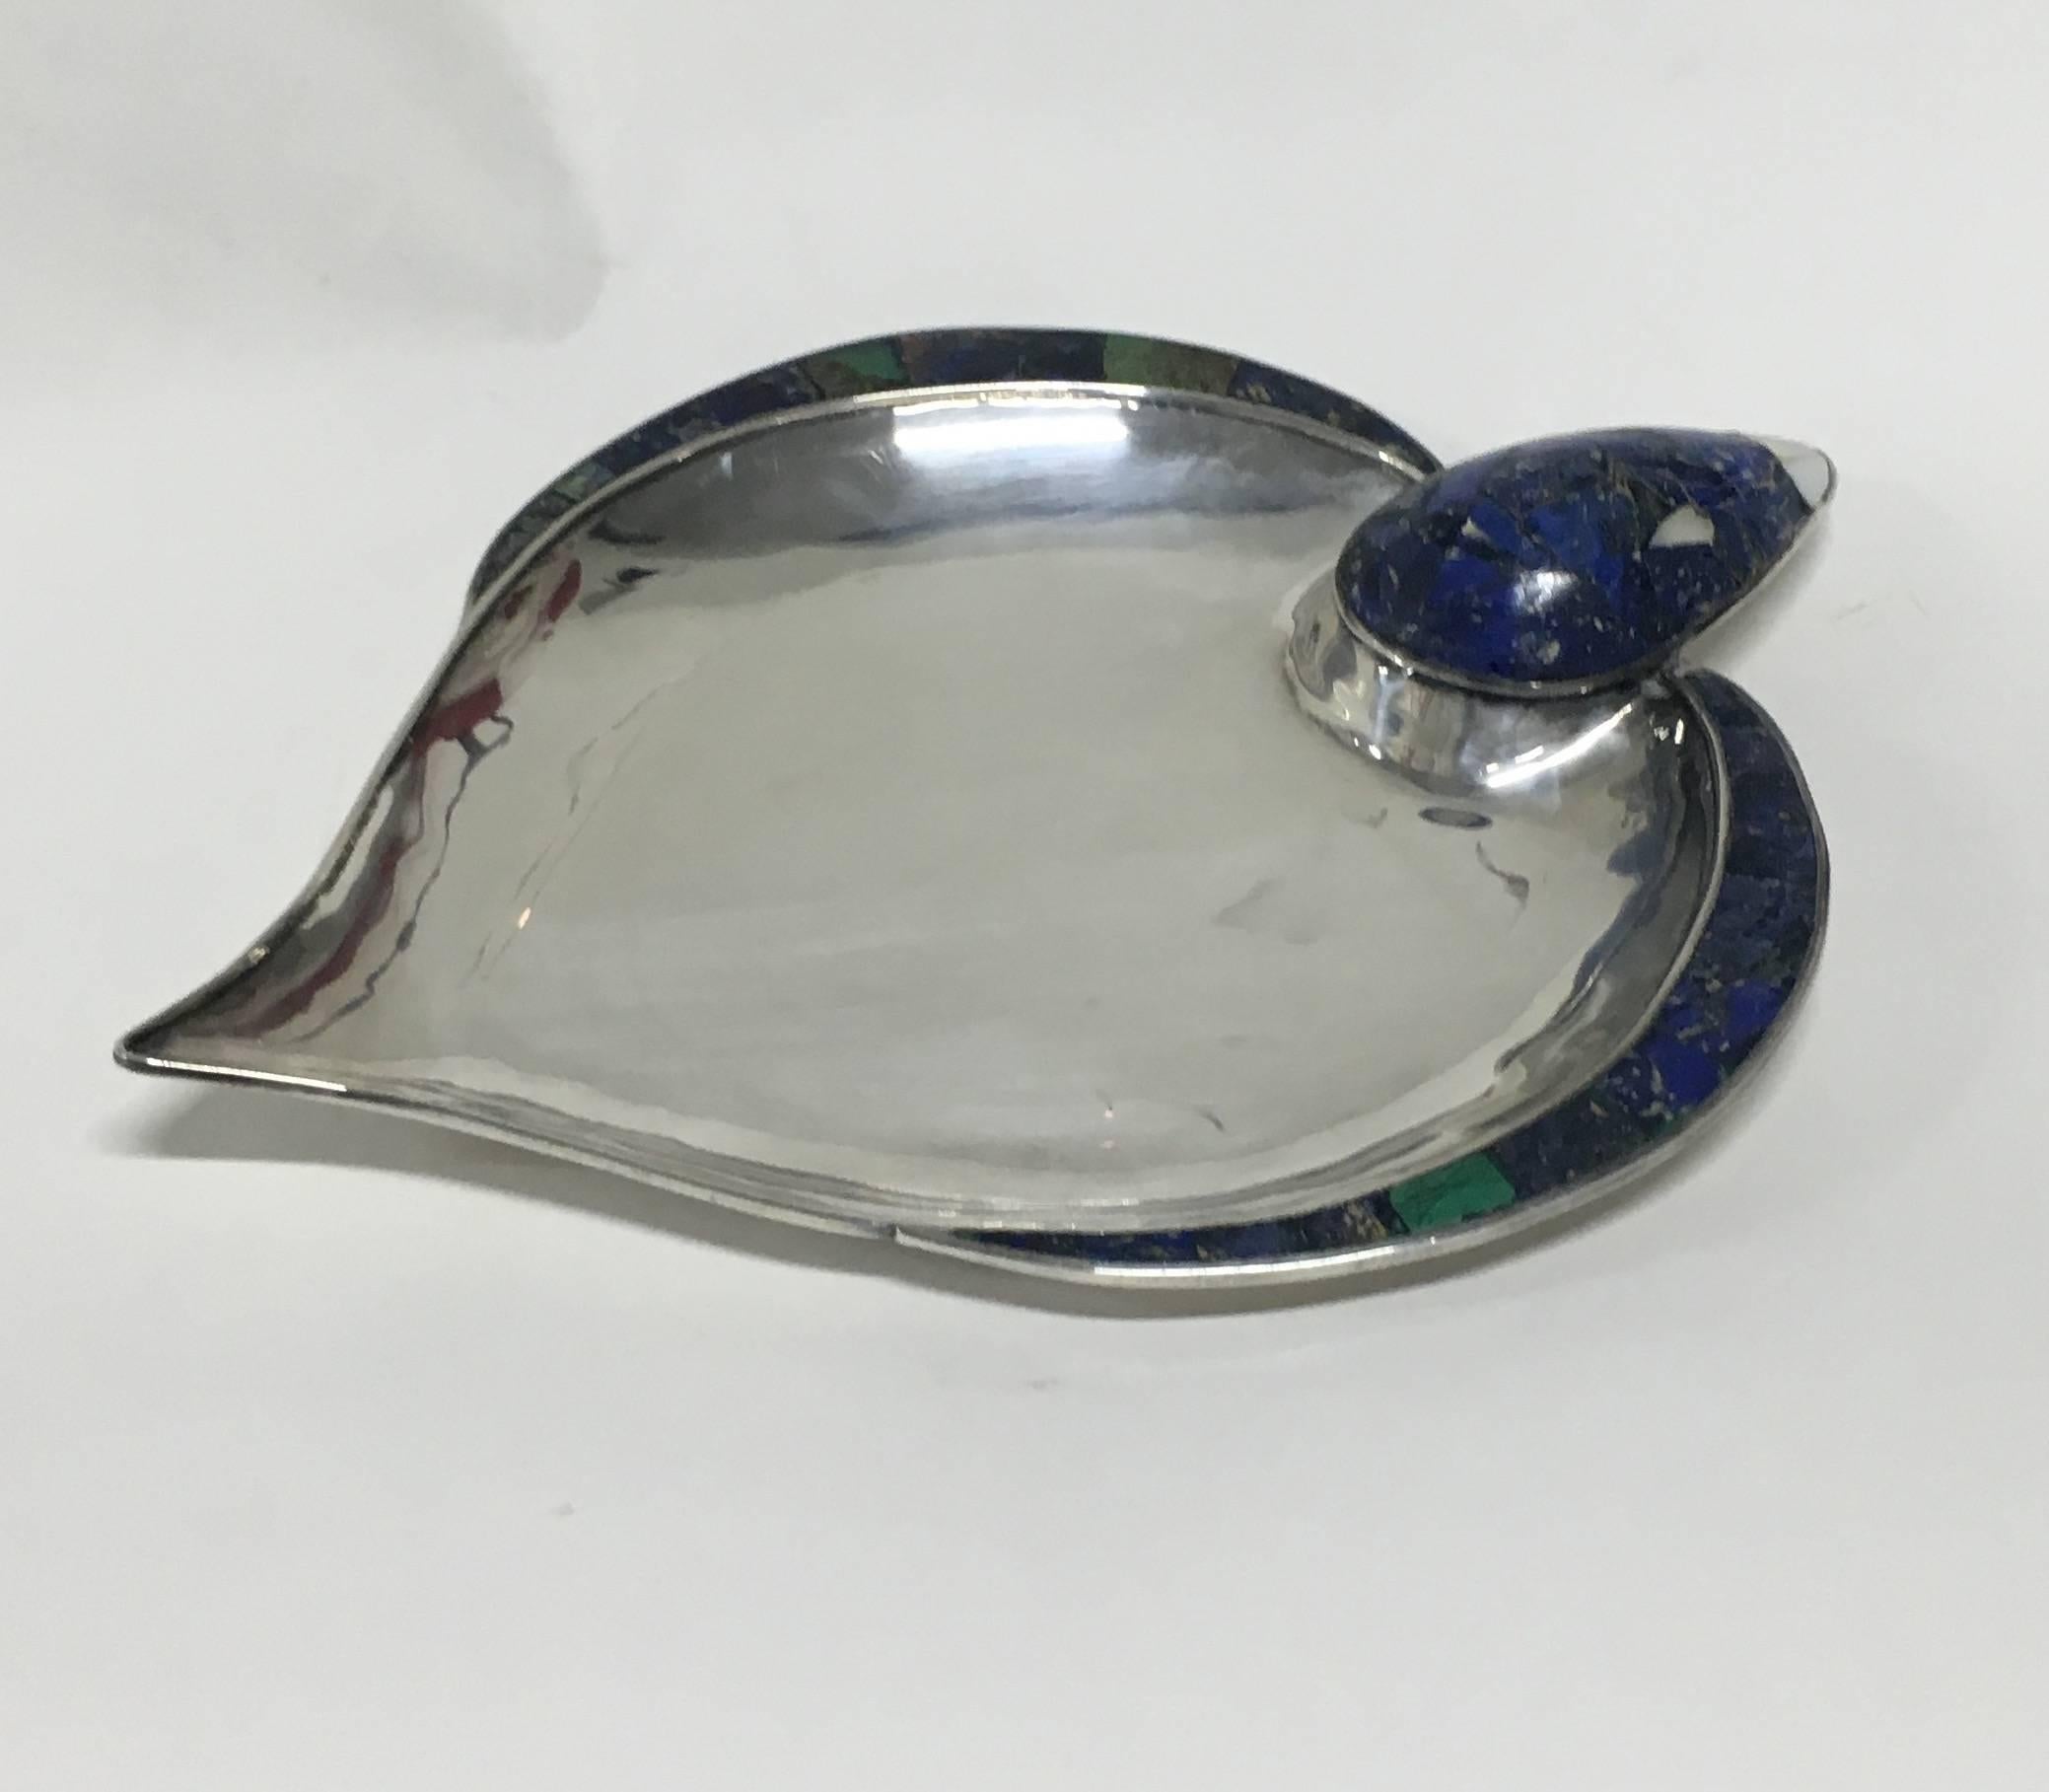 Large low bowl in silver-plated brass inlaid with malachite and sodalite with mother-of-pearl eyes and bill. By Los Castillo, 1950s. Very fine original condition with slight usage scratching and dulling to underside.